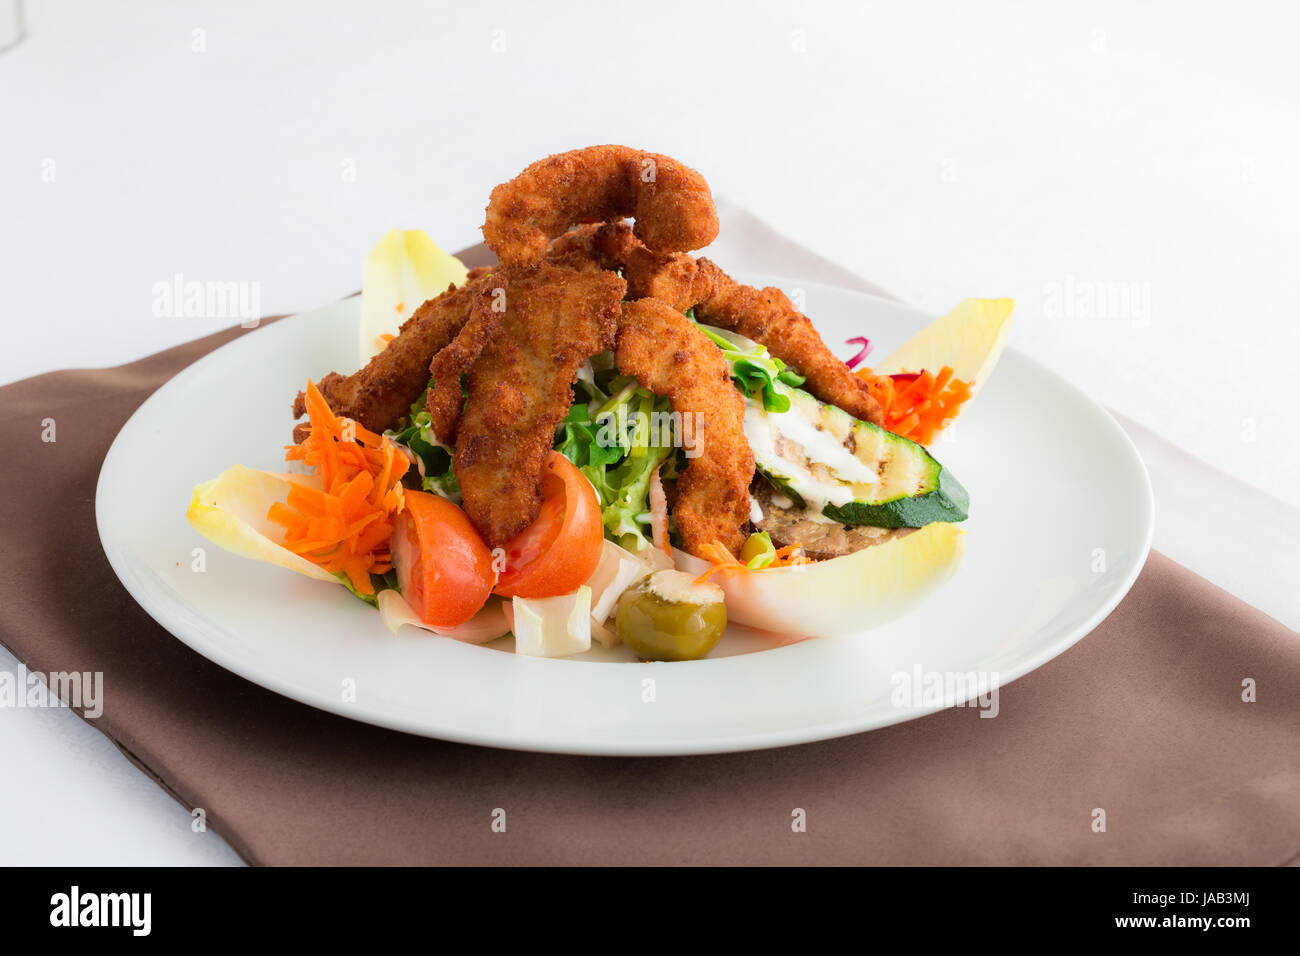 Mixed salad with green salad, endives, tomatoes, courgettes, olives, carrots and fried chicken. This is an Italian recipe. Stock Photo